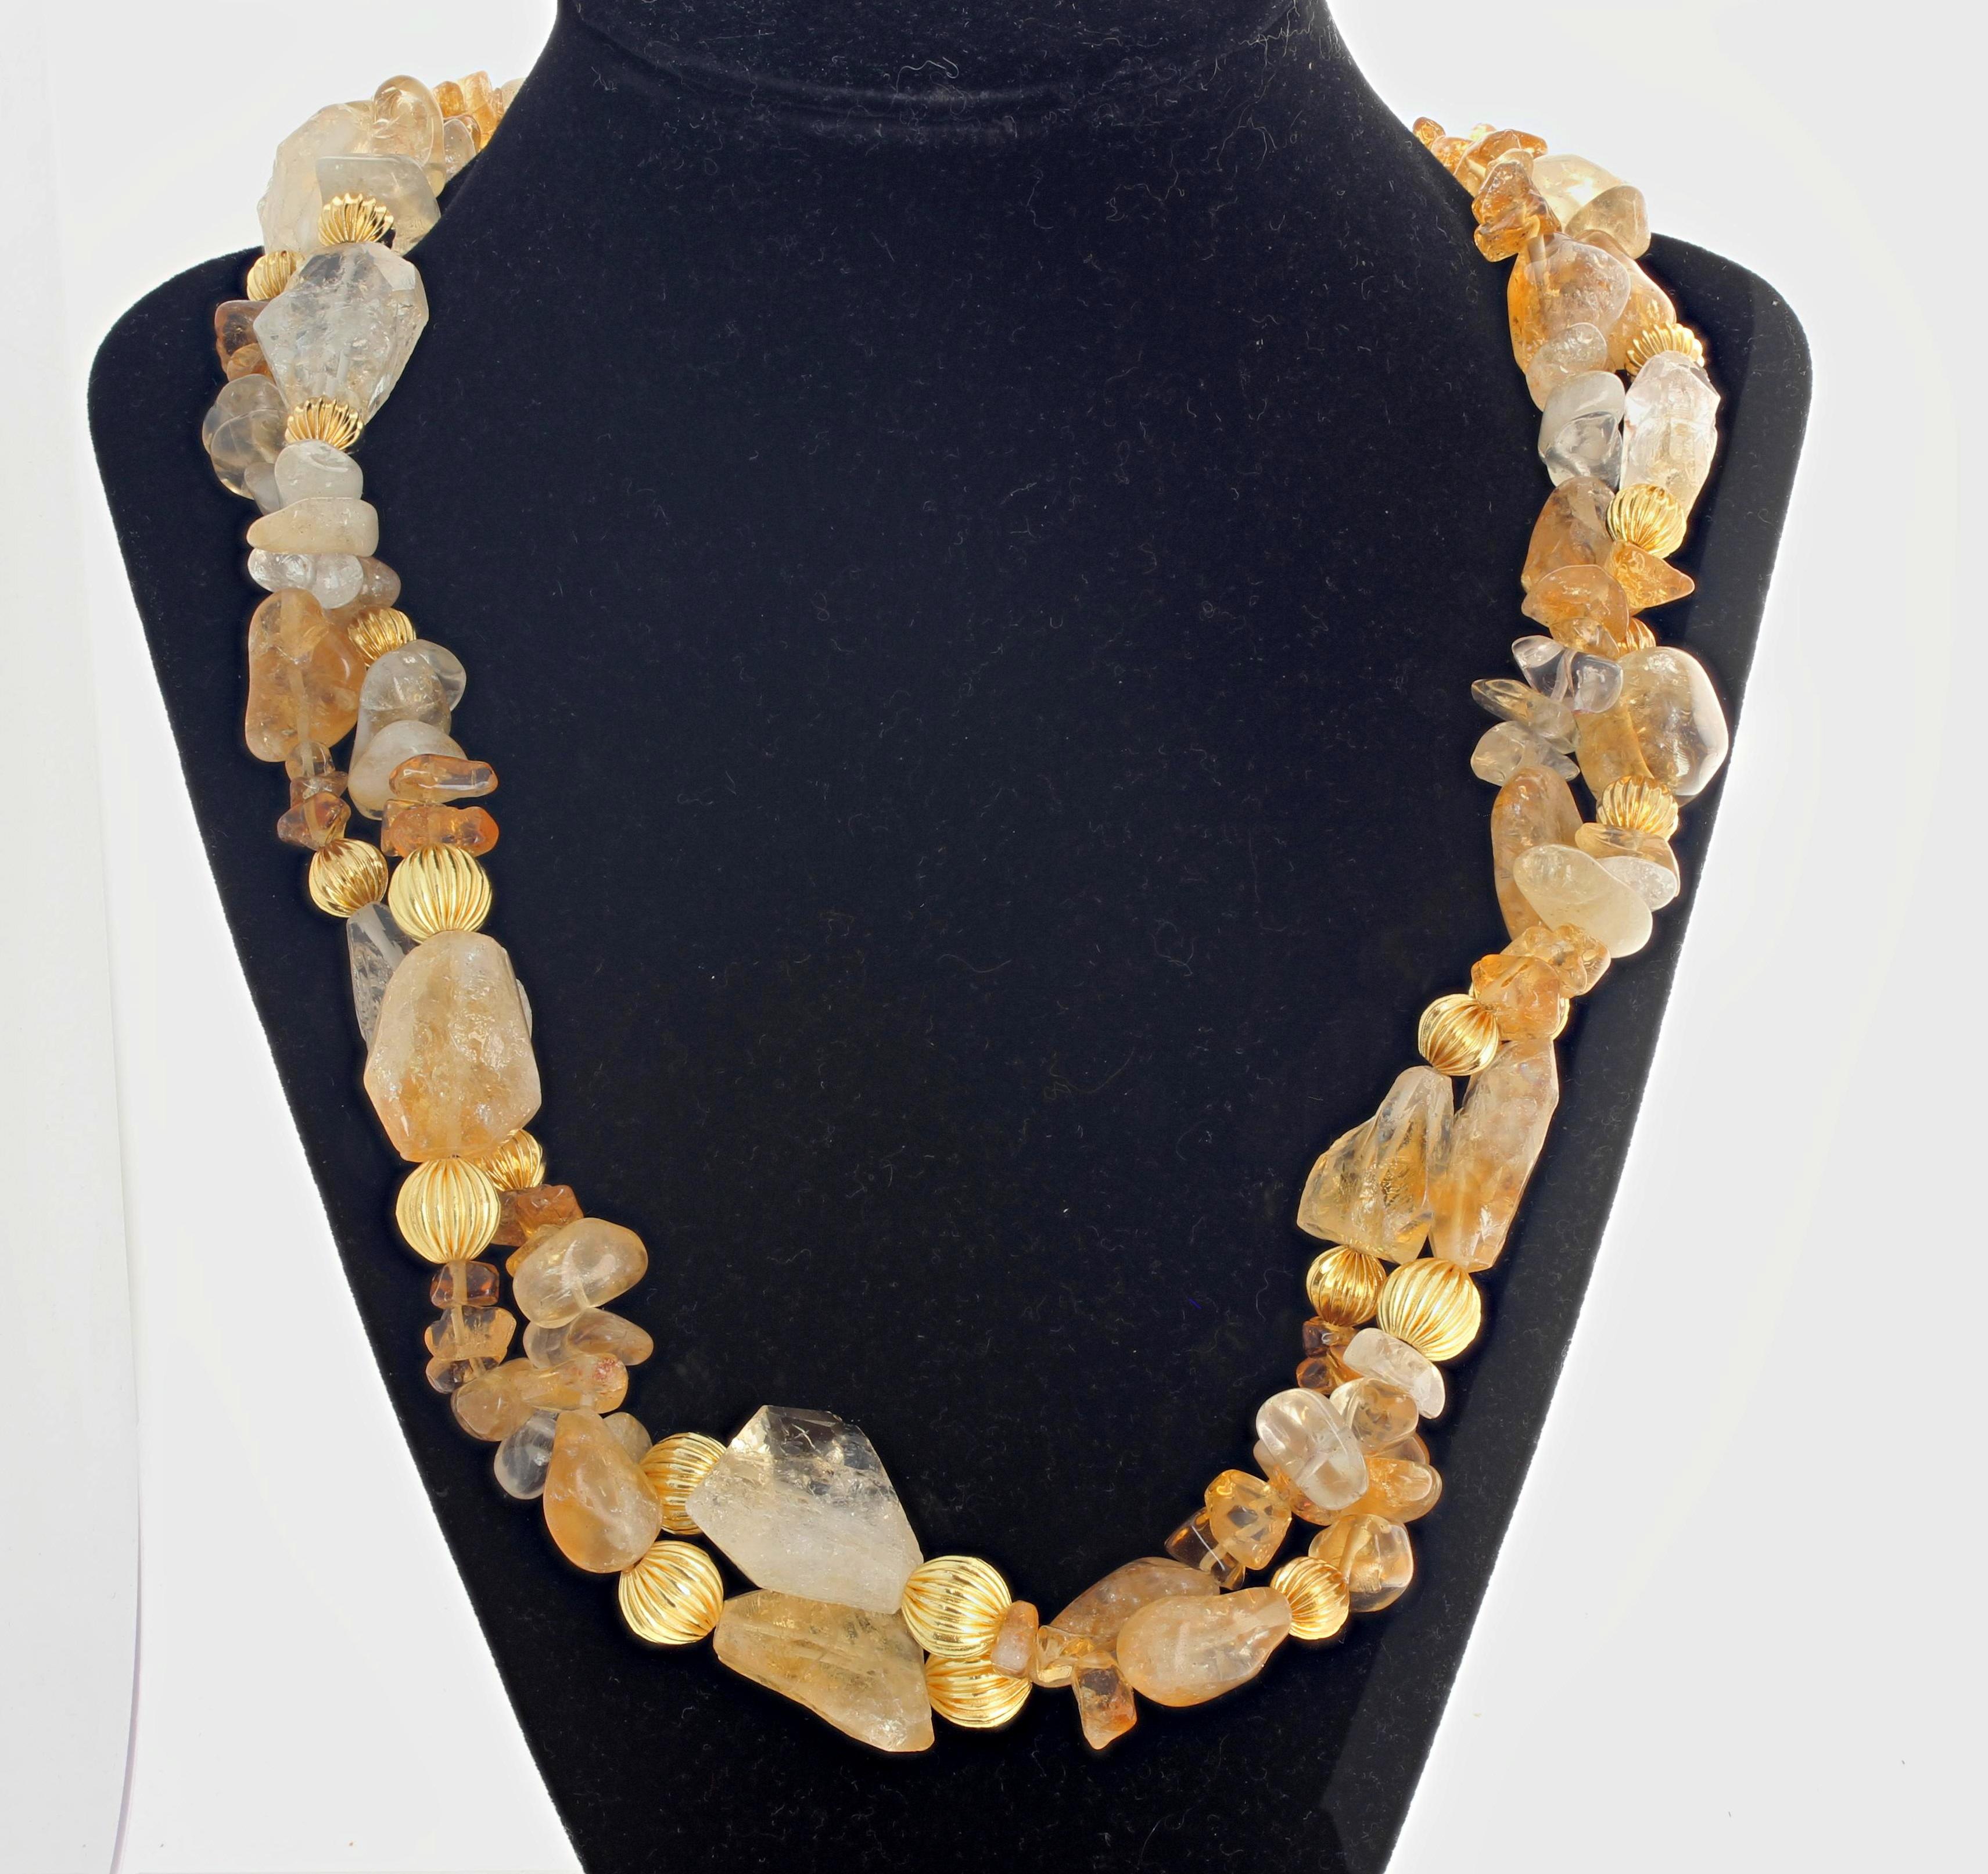 This double strand golden necklace of highly polished natural Citrine rocks accented with golden rondels is 22 inches long set with an easy to use gold plated hook clasp.  The largest Citrine is 22 mm x 18 mm.  This is dramatic for daytime to